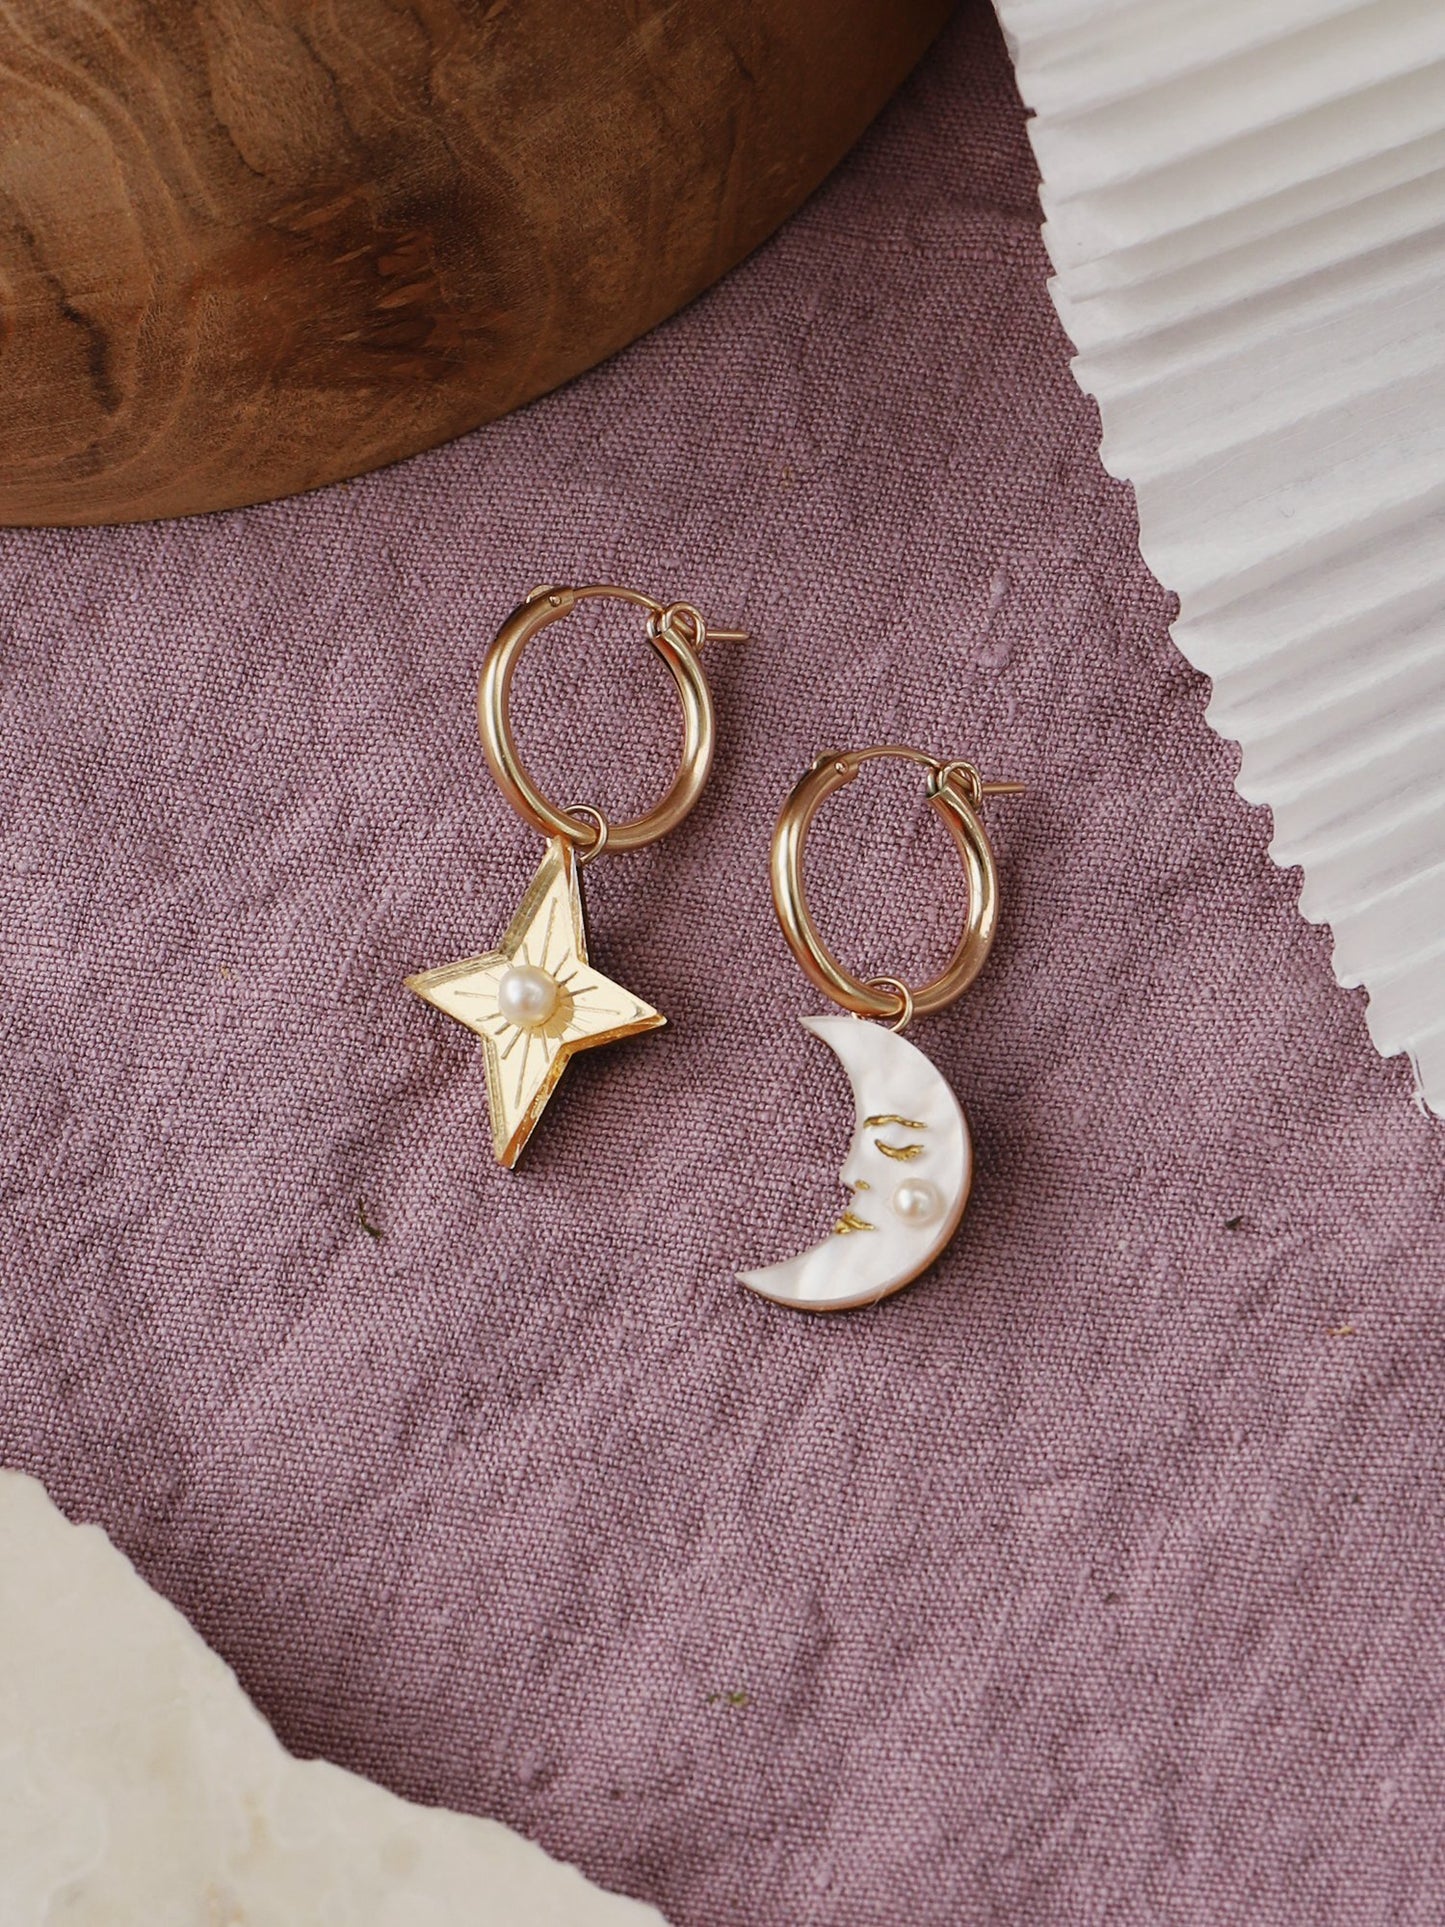 A pair of mis-matched gold hoop earrings, one has a gold star pendant with a pearl in the centre and the second earring has a crescent moon pendant hanging from the hoop.